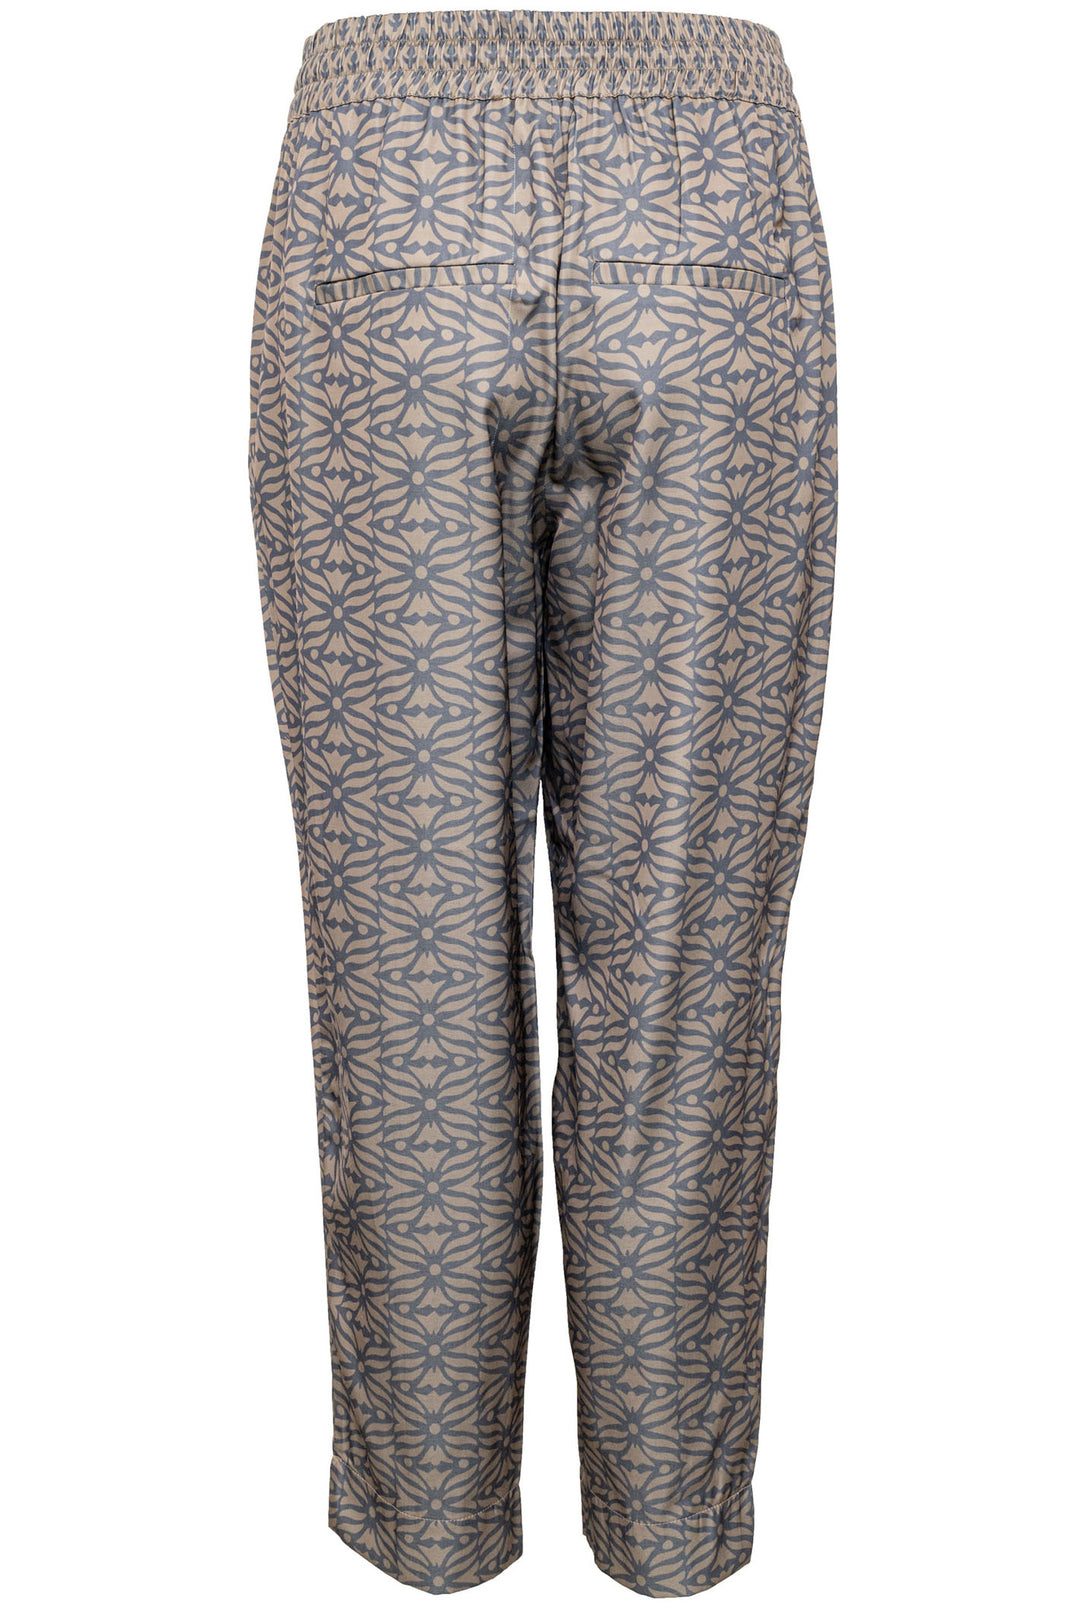 Costa Mani 2401416 Taupe Print Bestie Trousers - Experience Boutique